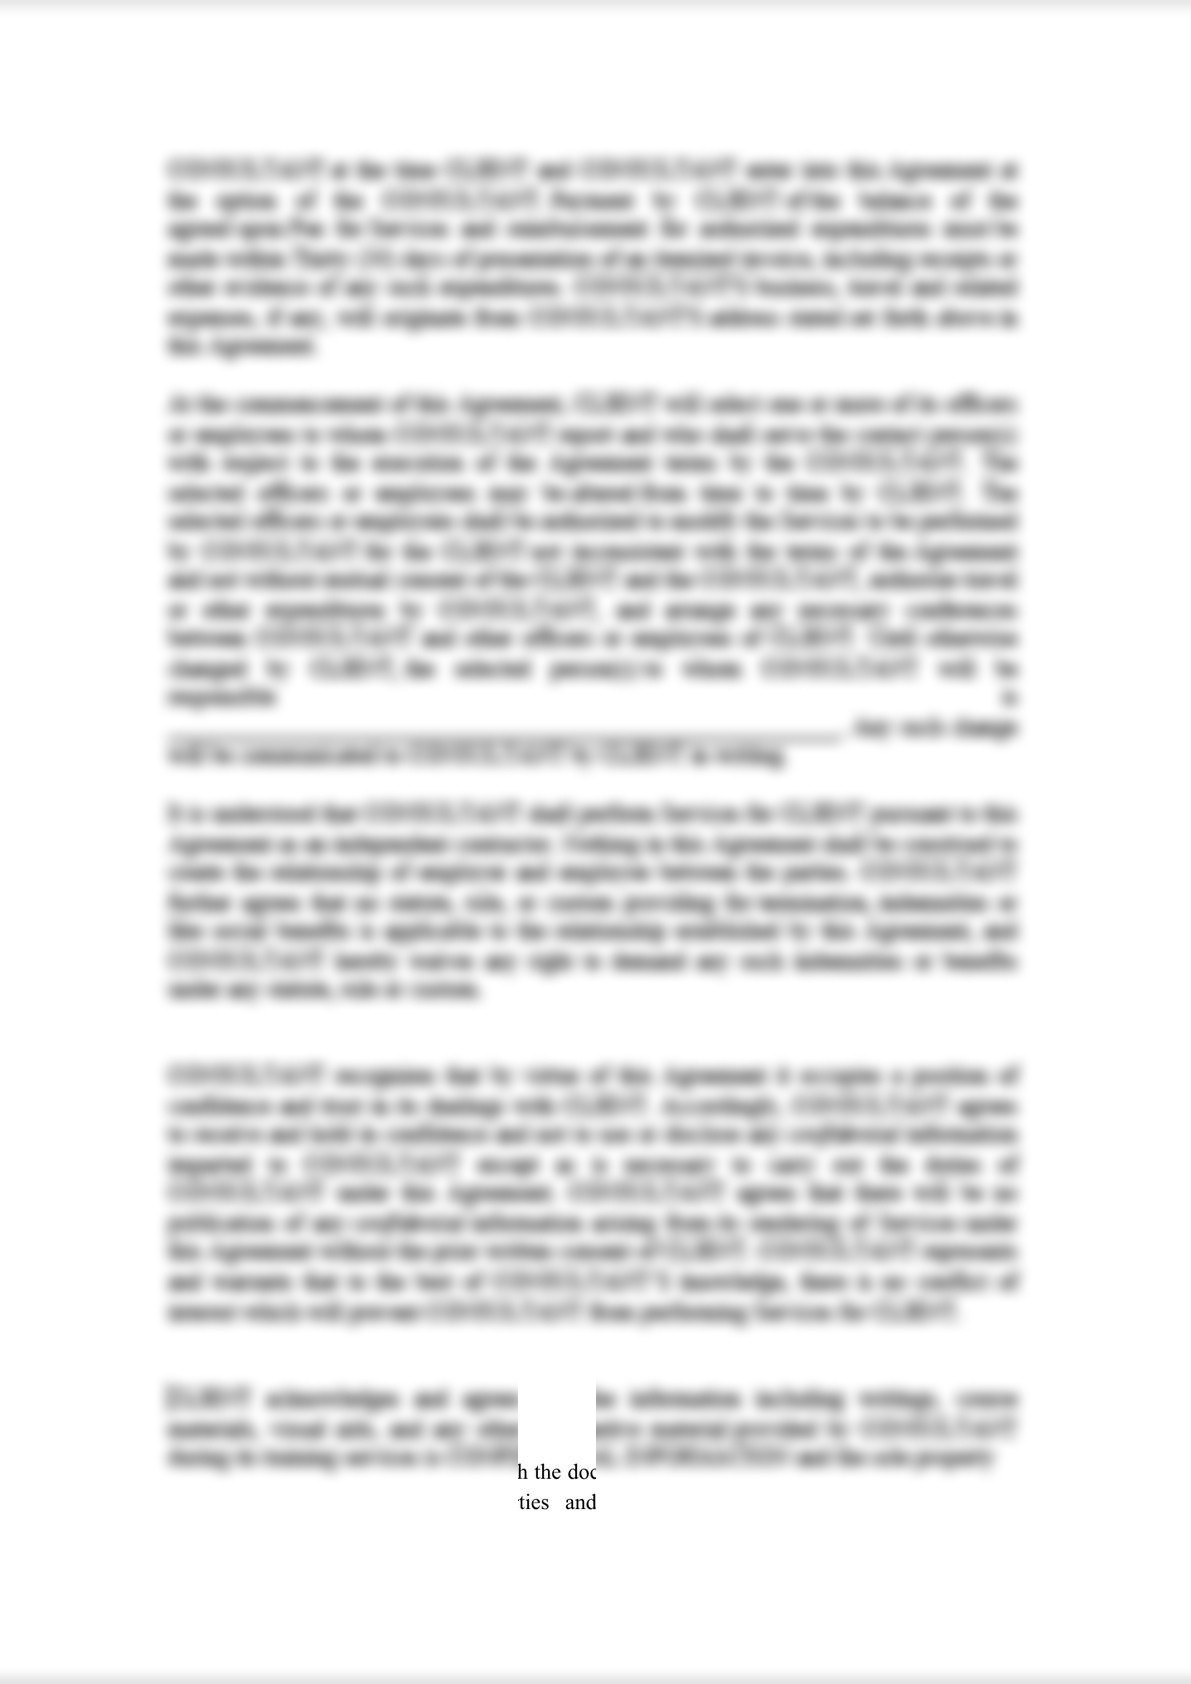 Share Purchase Agreement (M&A)-7